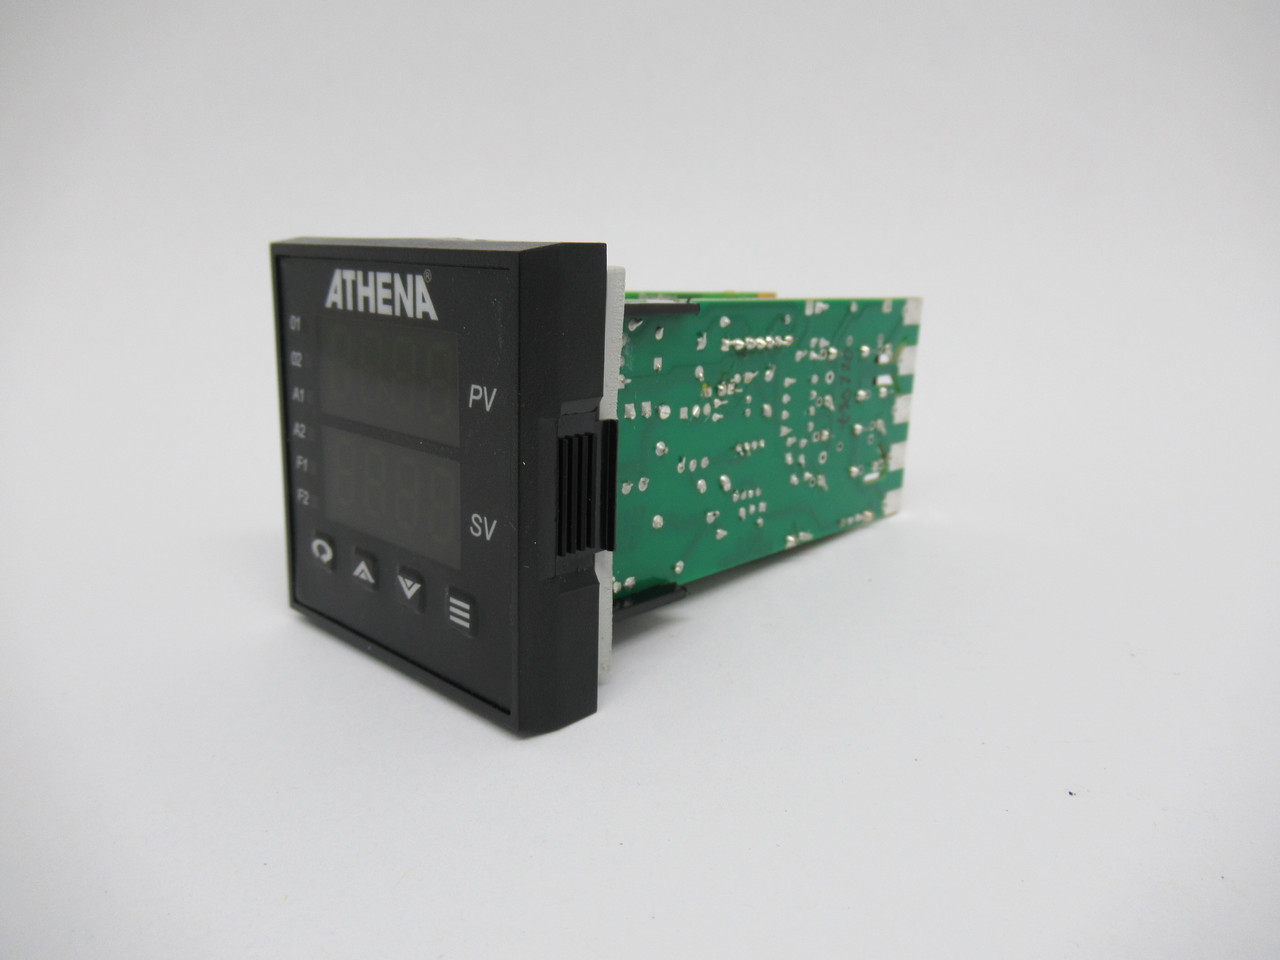 Athena 16C-B-B-B-00-CY Temperature Controller MISSING CASE USED